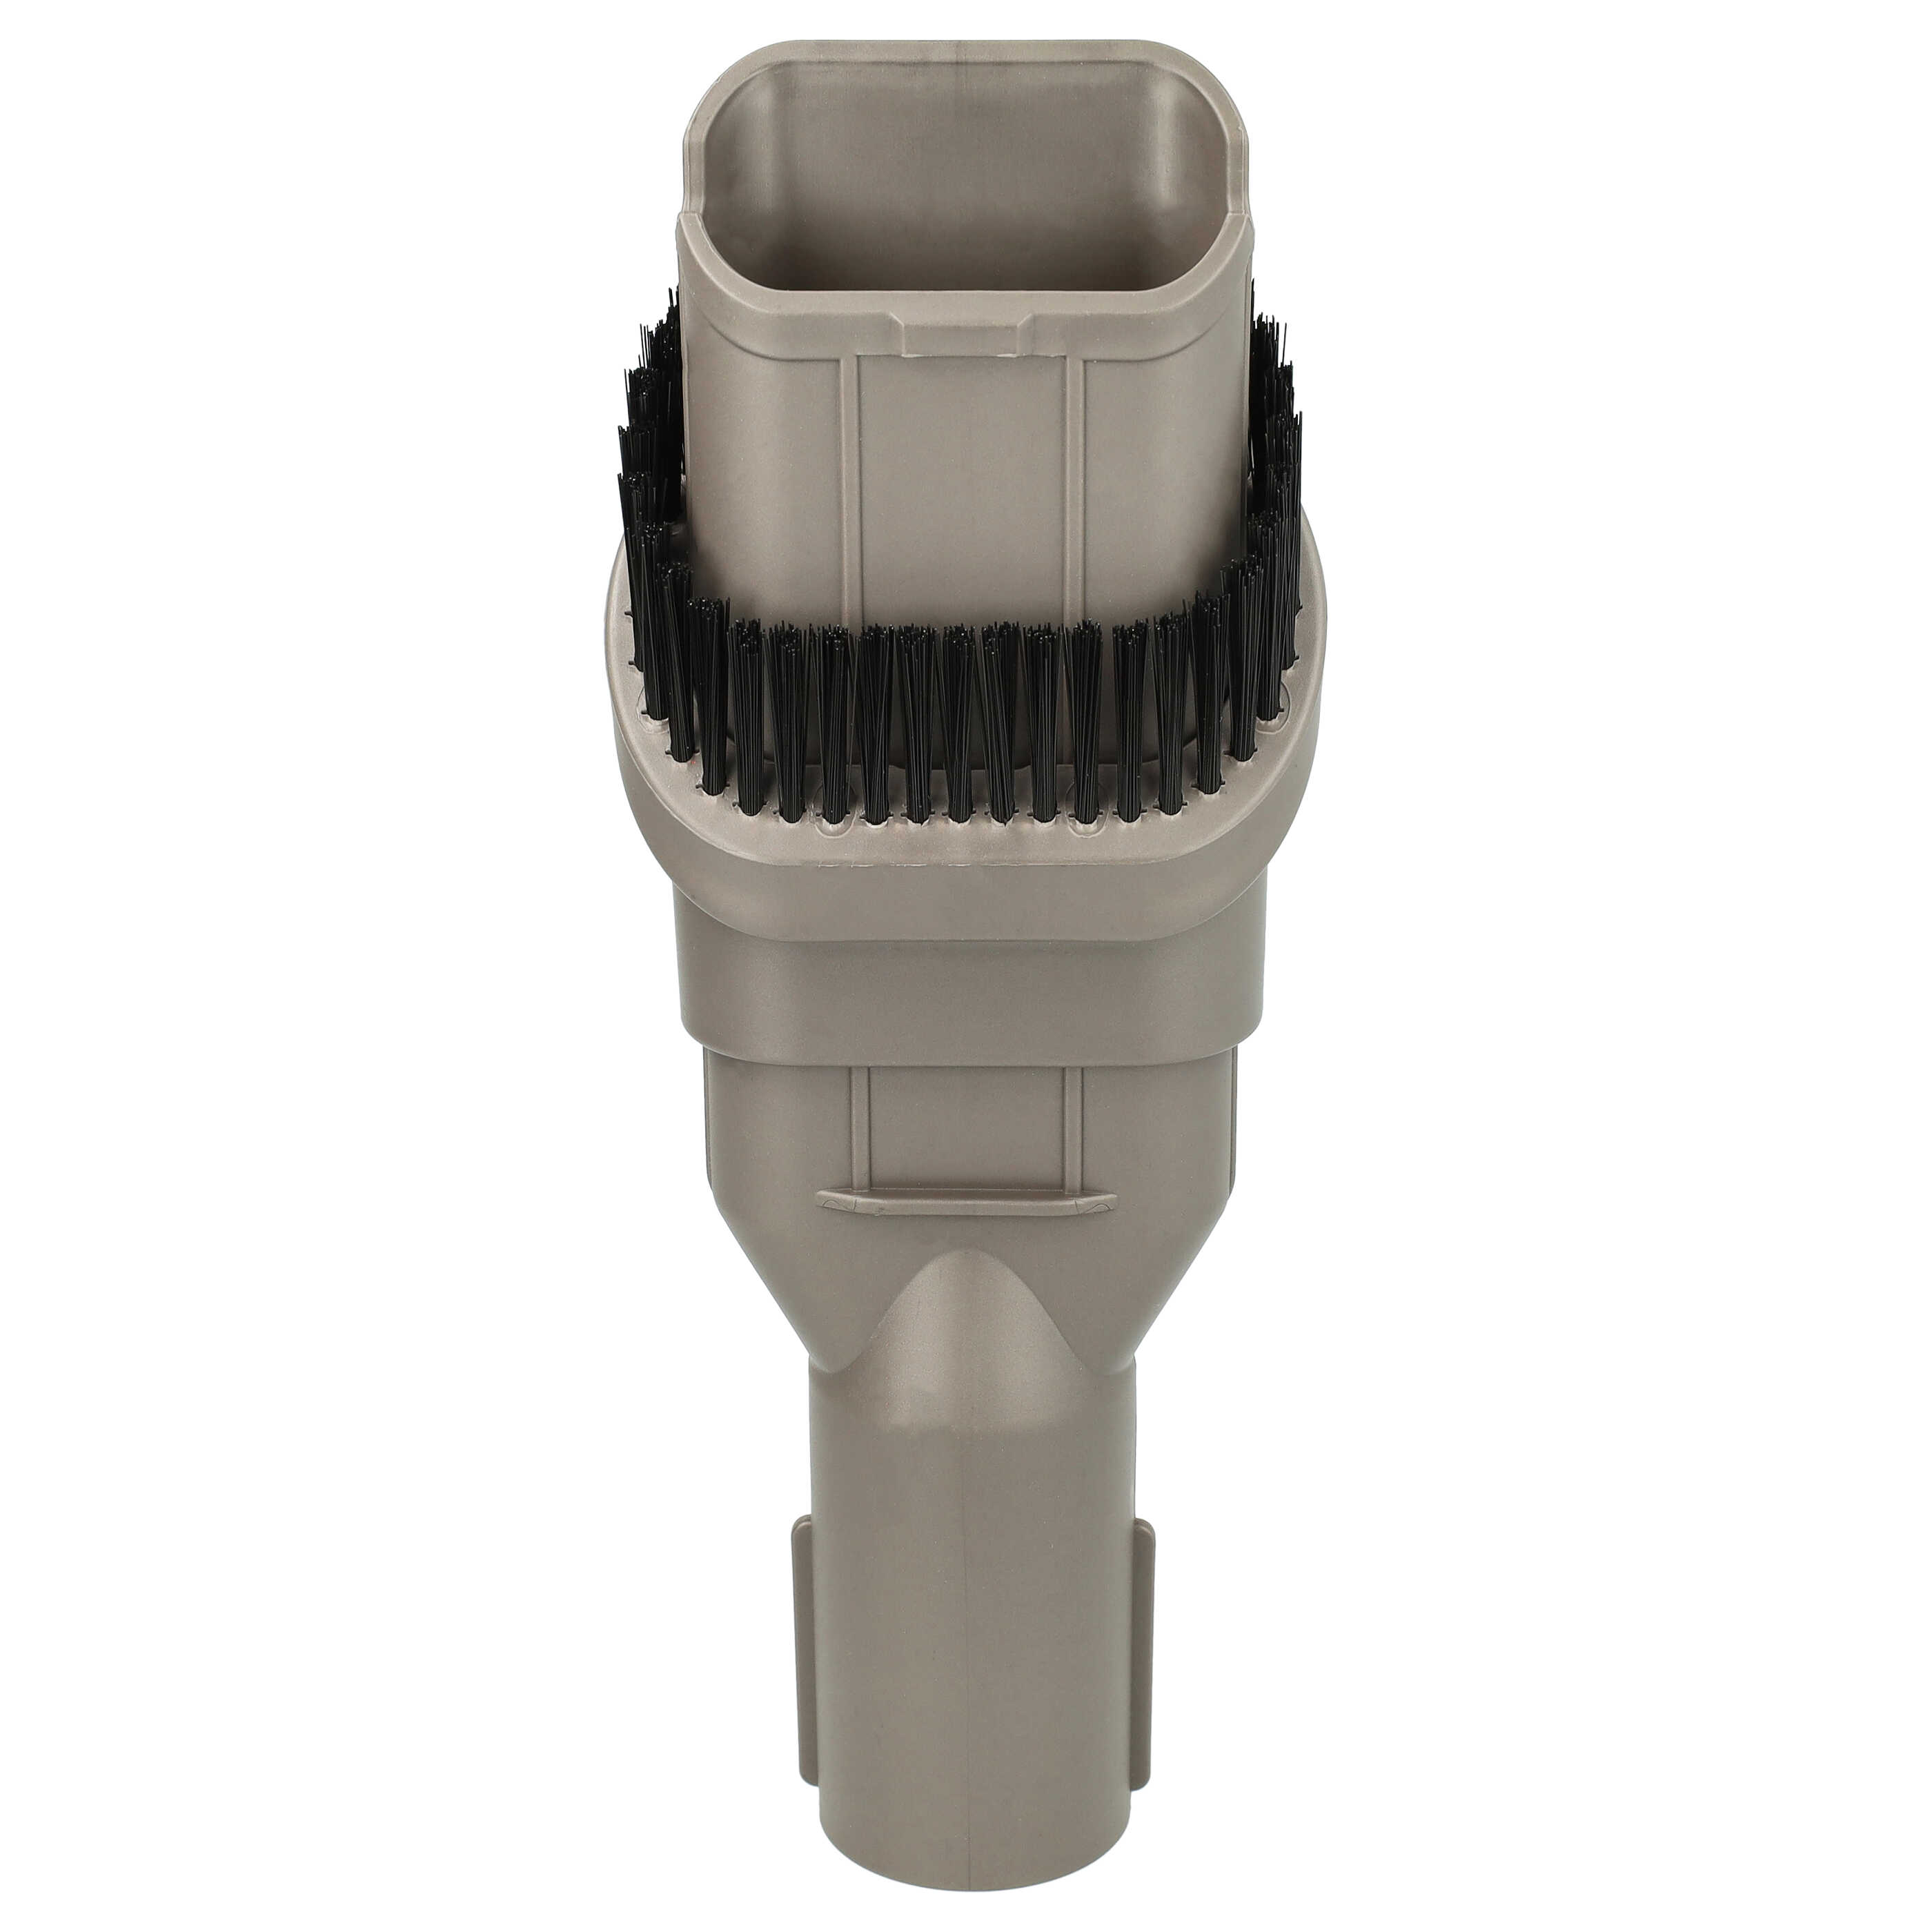  2-in-1 Combi / Crevice Tool for Dyson SV10 Vacuum Cleaner etc. - Furniture Brush with Bristles